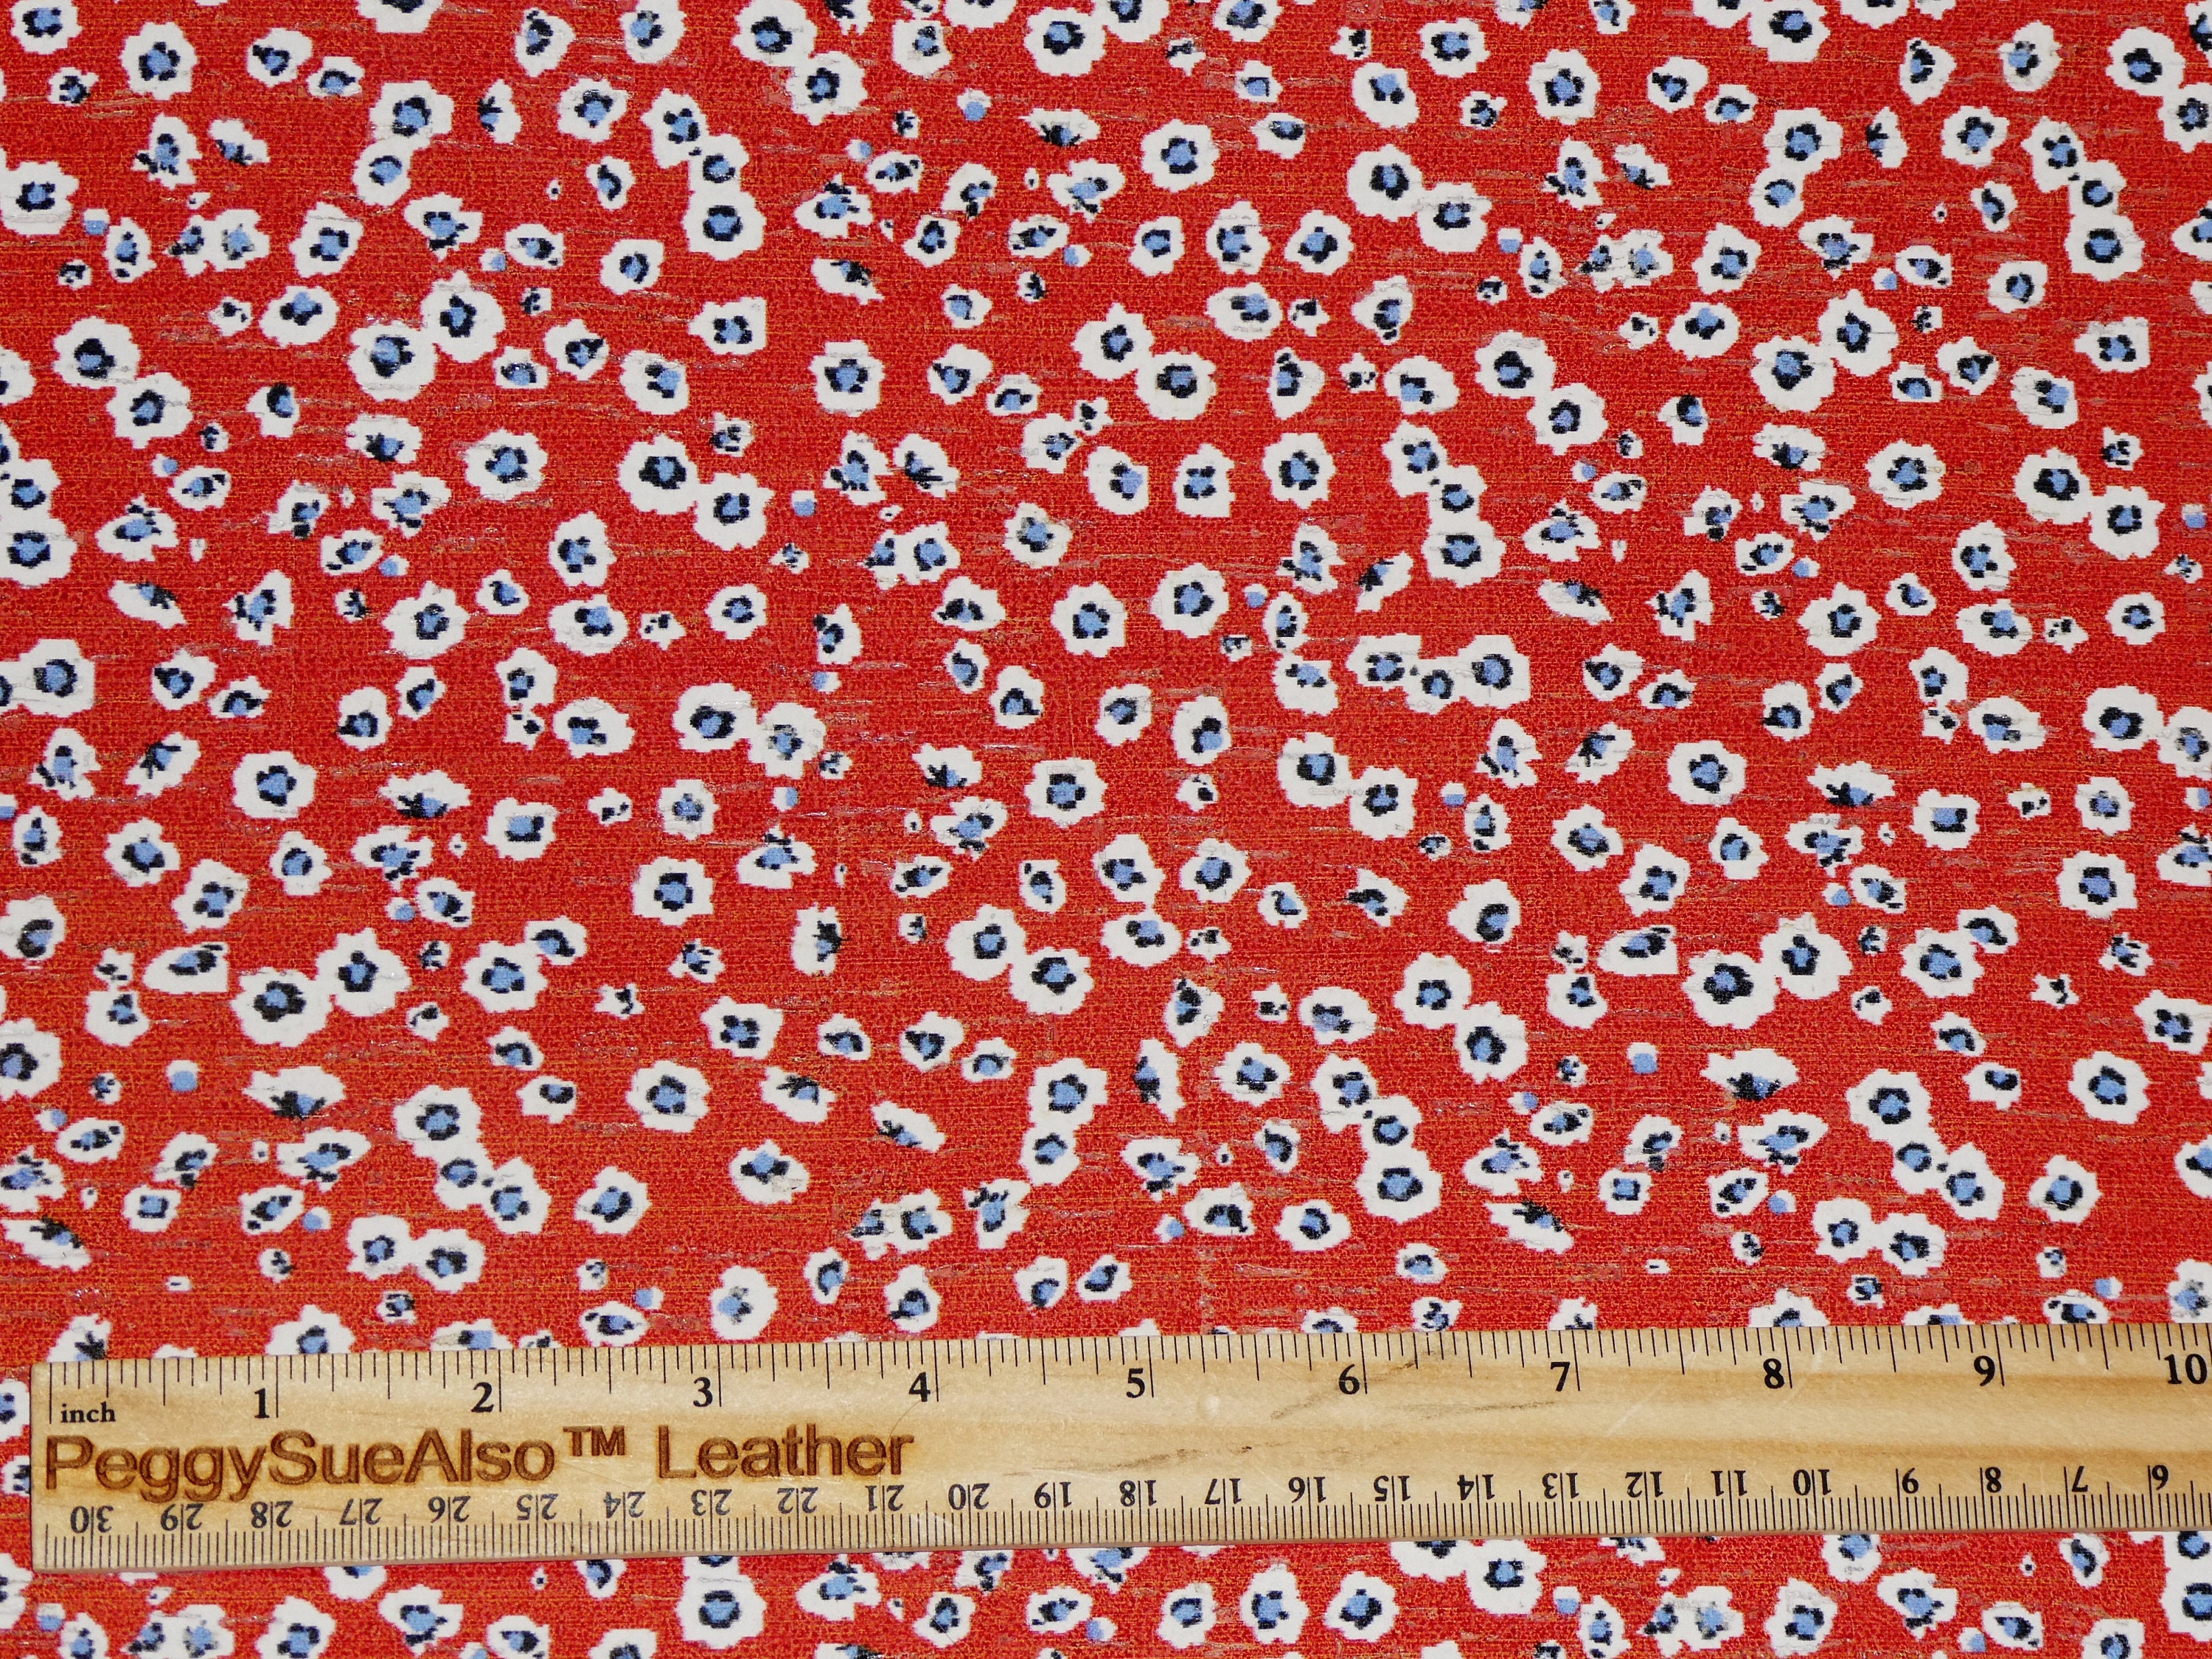 Cork 12x12 DITSY FLOWERS on RED with Blue and White Cork applied to Leather for bodystrength Thick 5.5oz2.2mm E5610-281